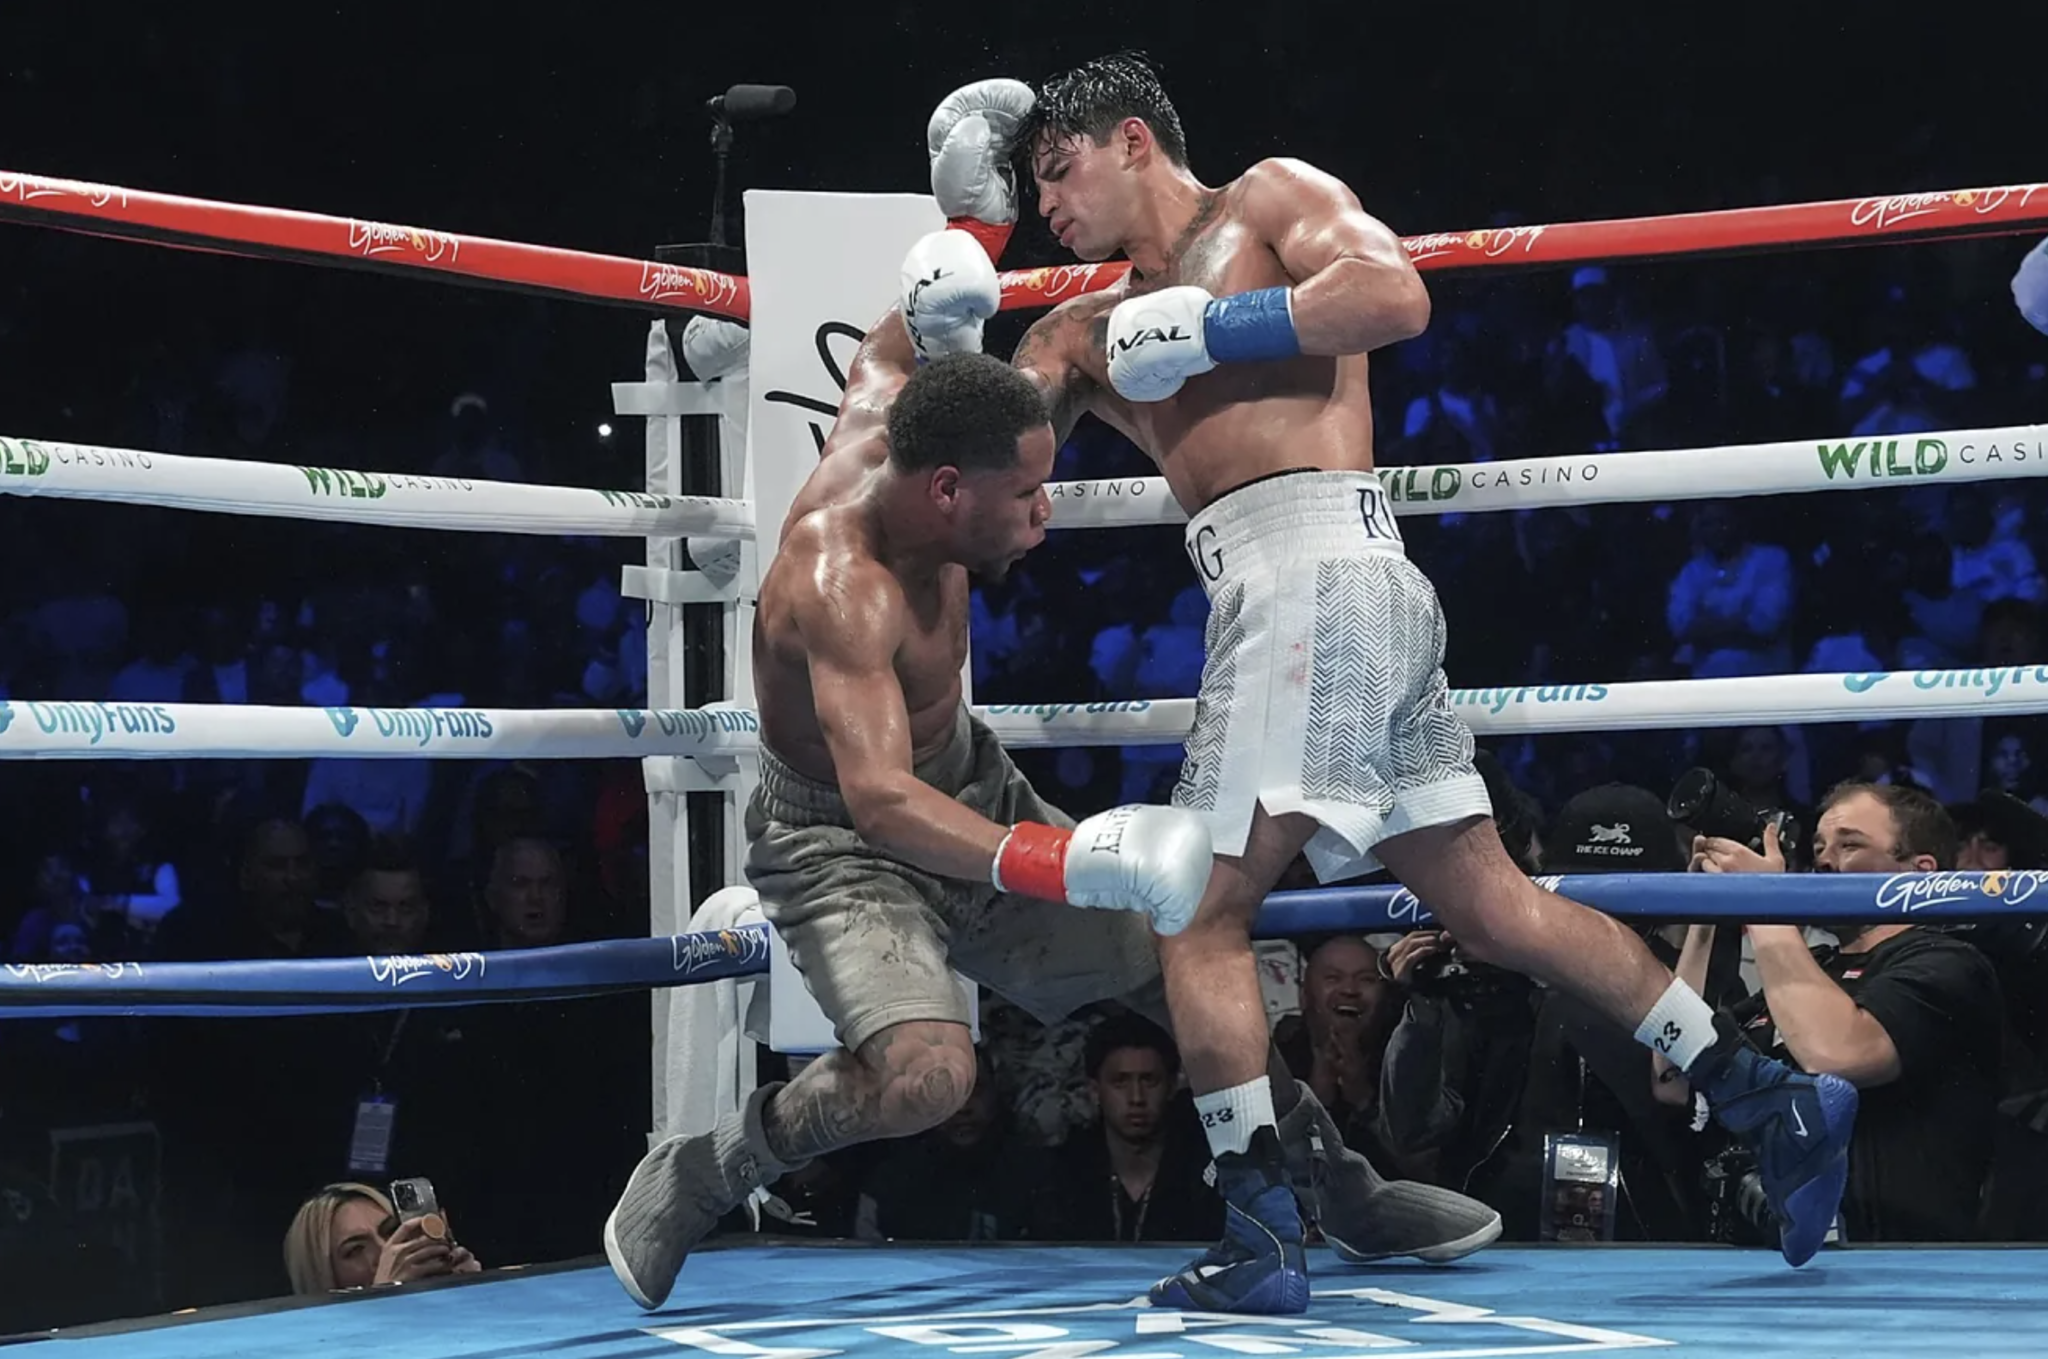 Ryan Garcia rules out rematch against Devin Haney and takes aim at Jaron Boots Ennis